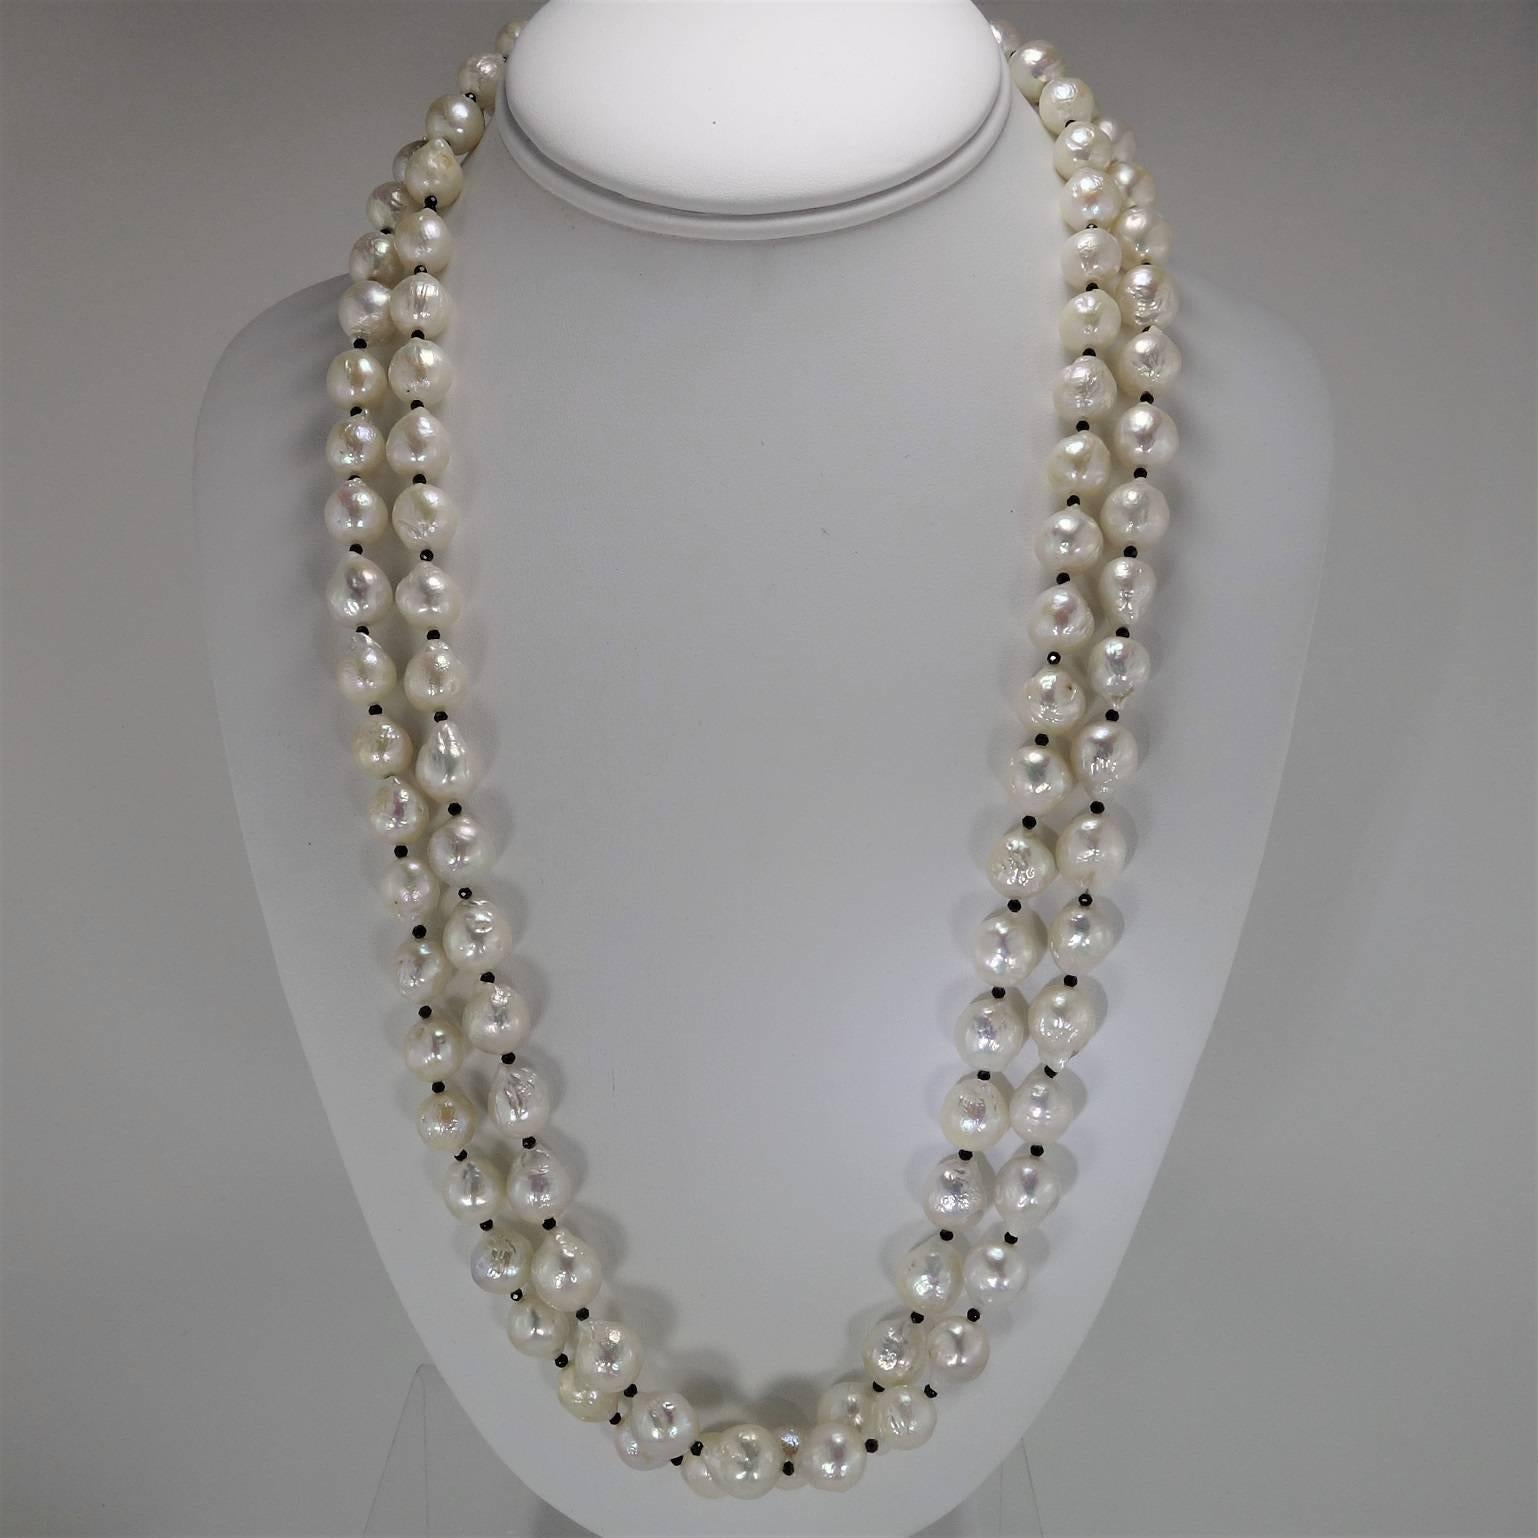 Women's or Men's Double Strand White Fireball Pearl Necklace